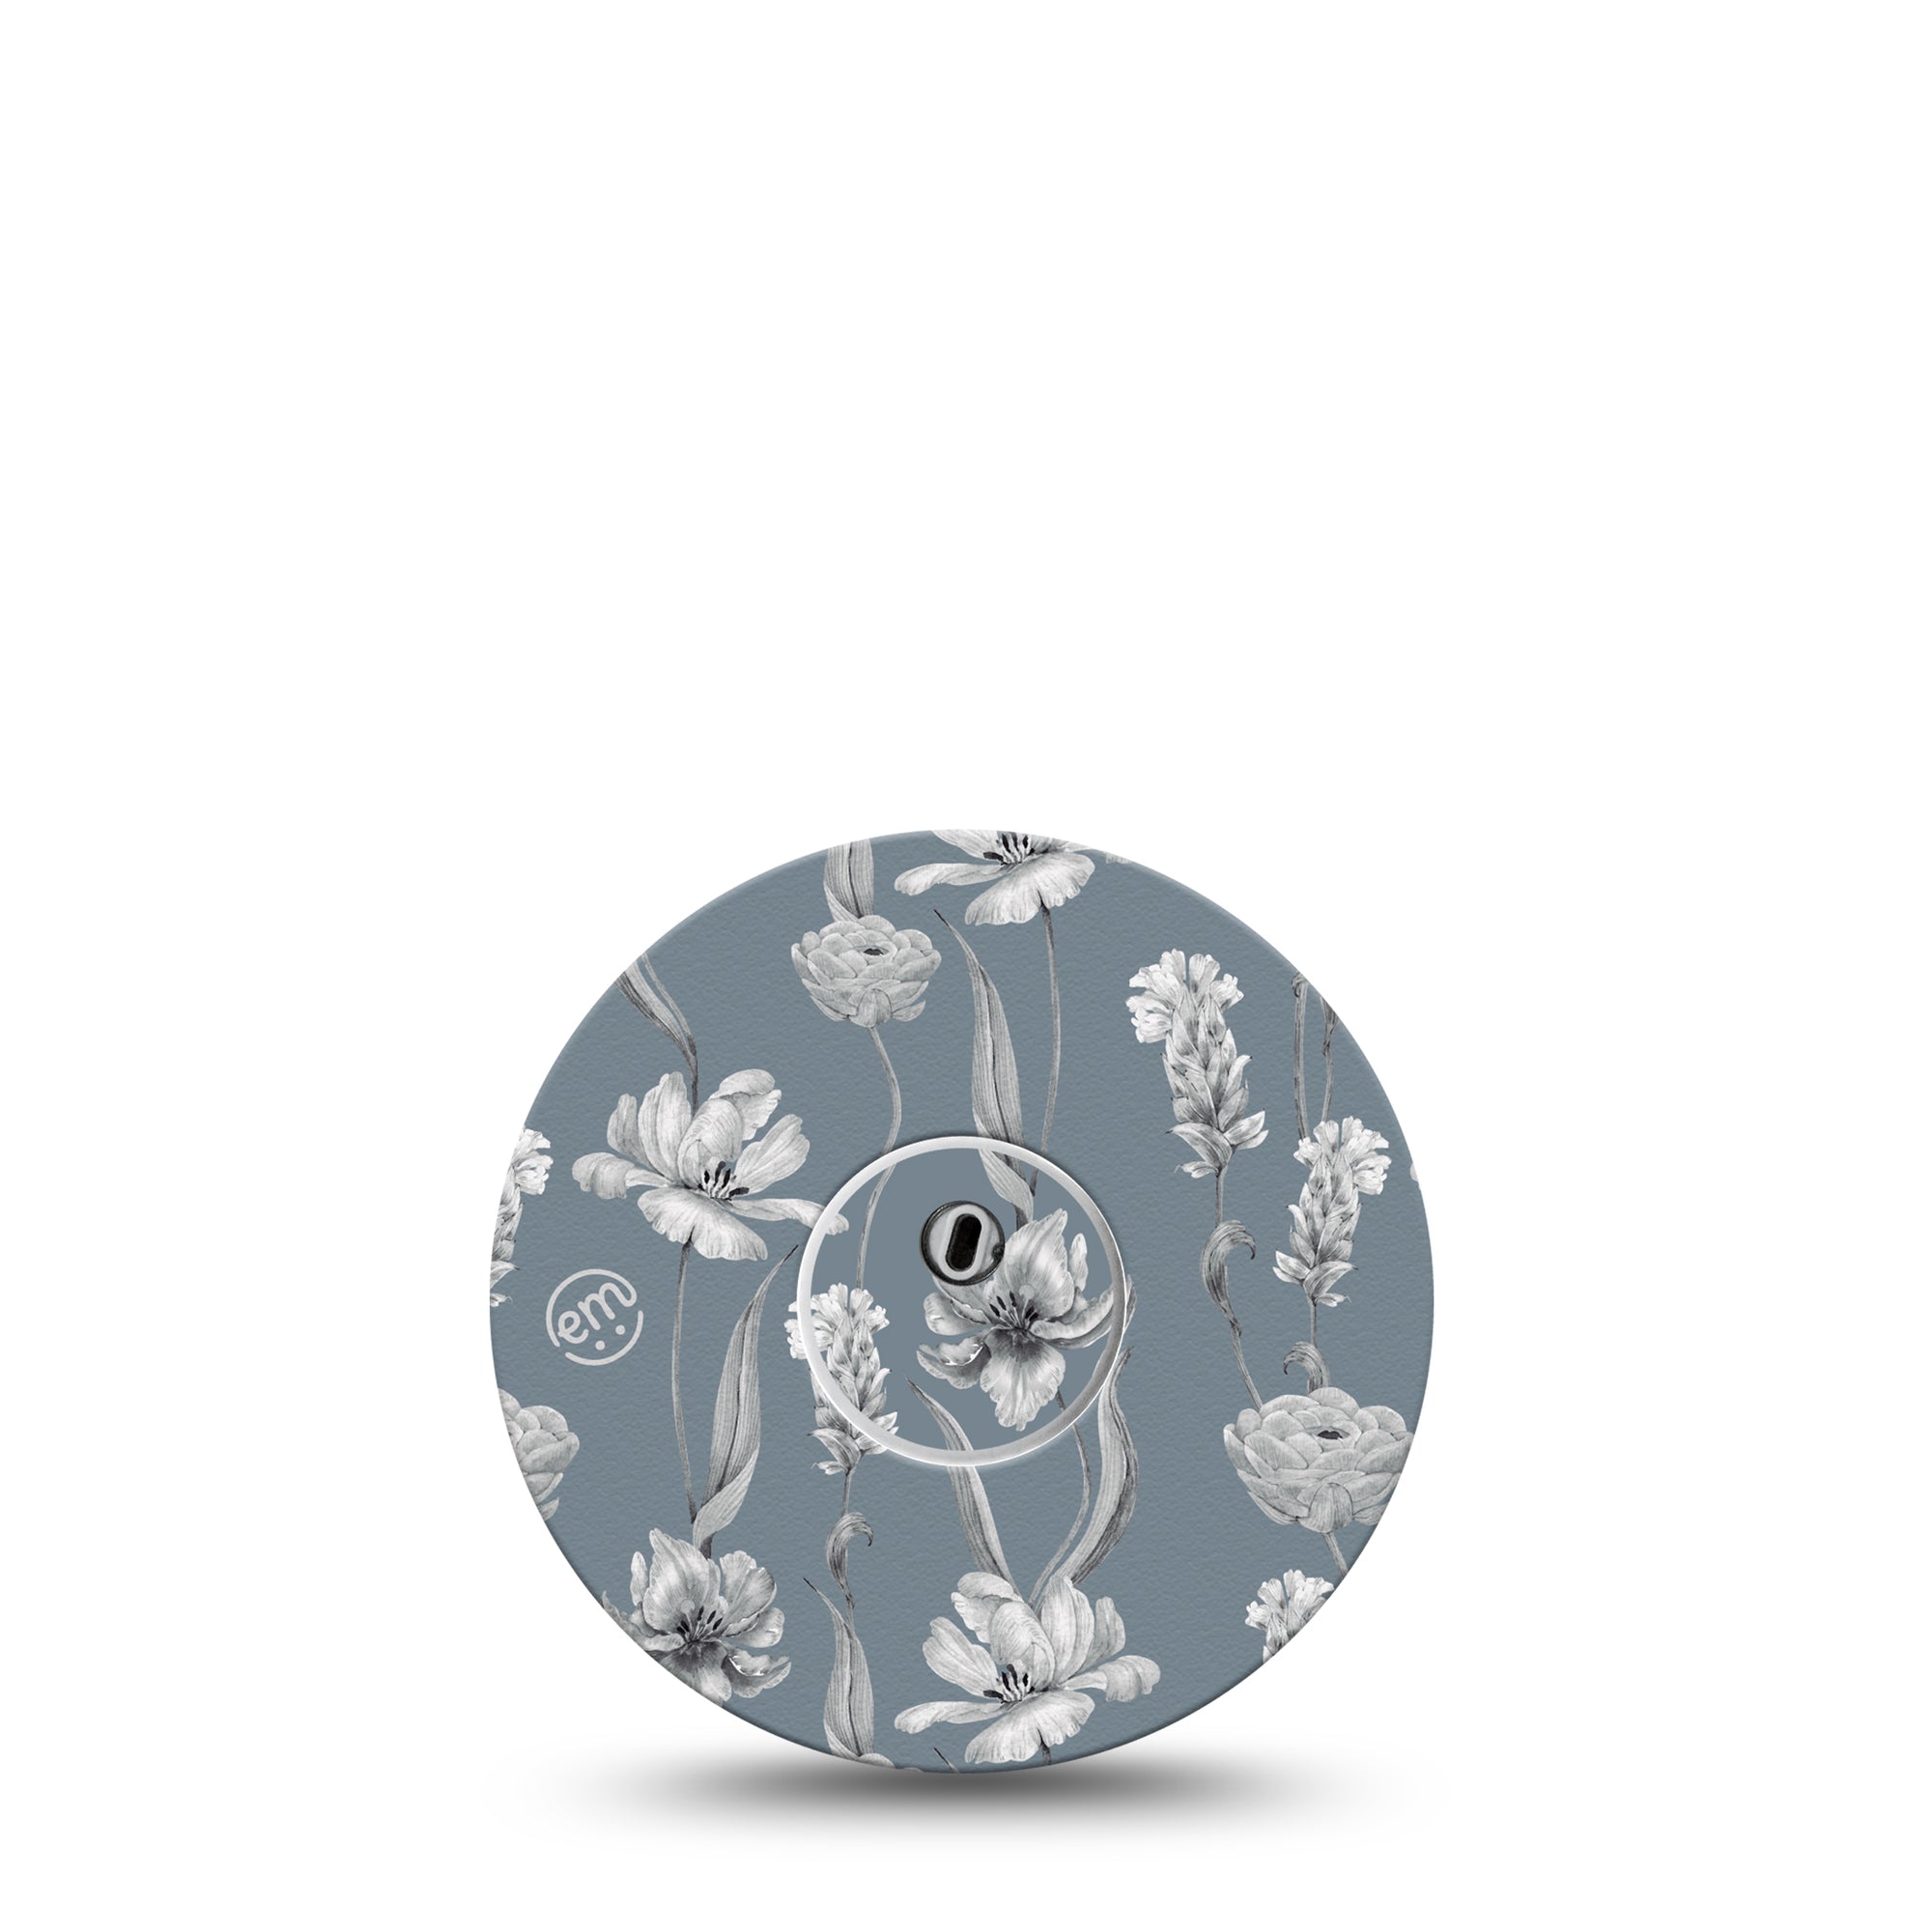 ExpressionMed Muted Petals Libre 3 Transmitter Sticker, Single, Muted Tone Flowers Floral CGM Vinyl Sticker with Matching Libre 3 fixing Ring Patch tape